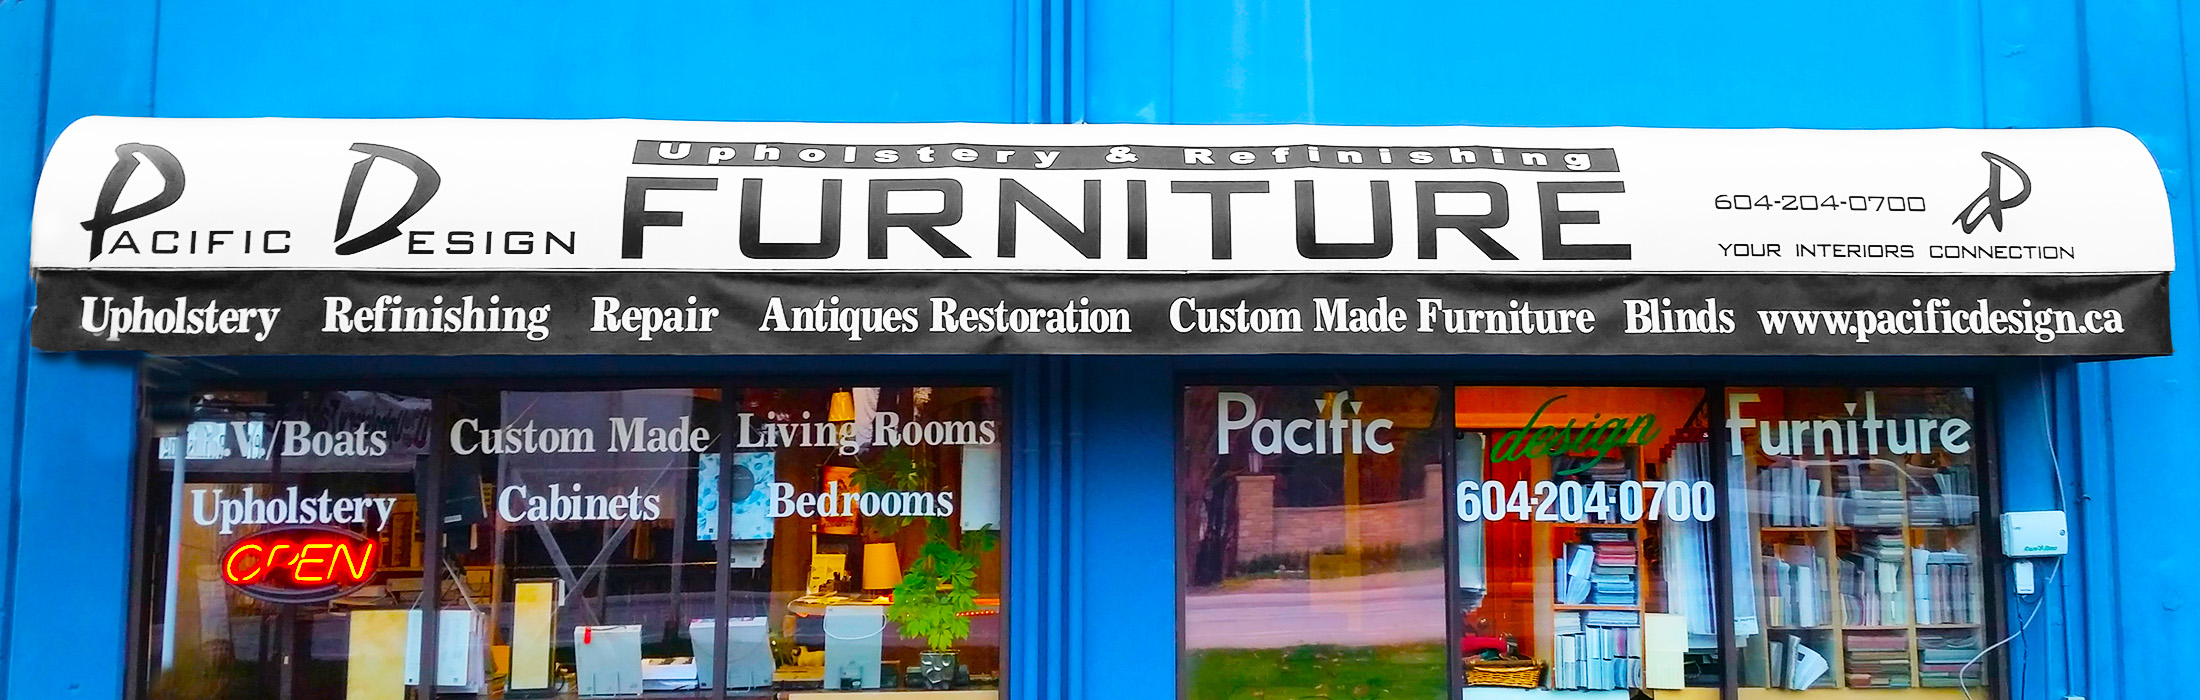 Pacific Design Furniture Store Front